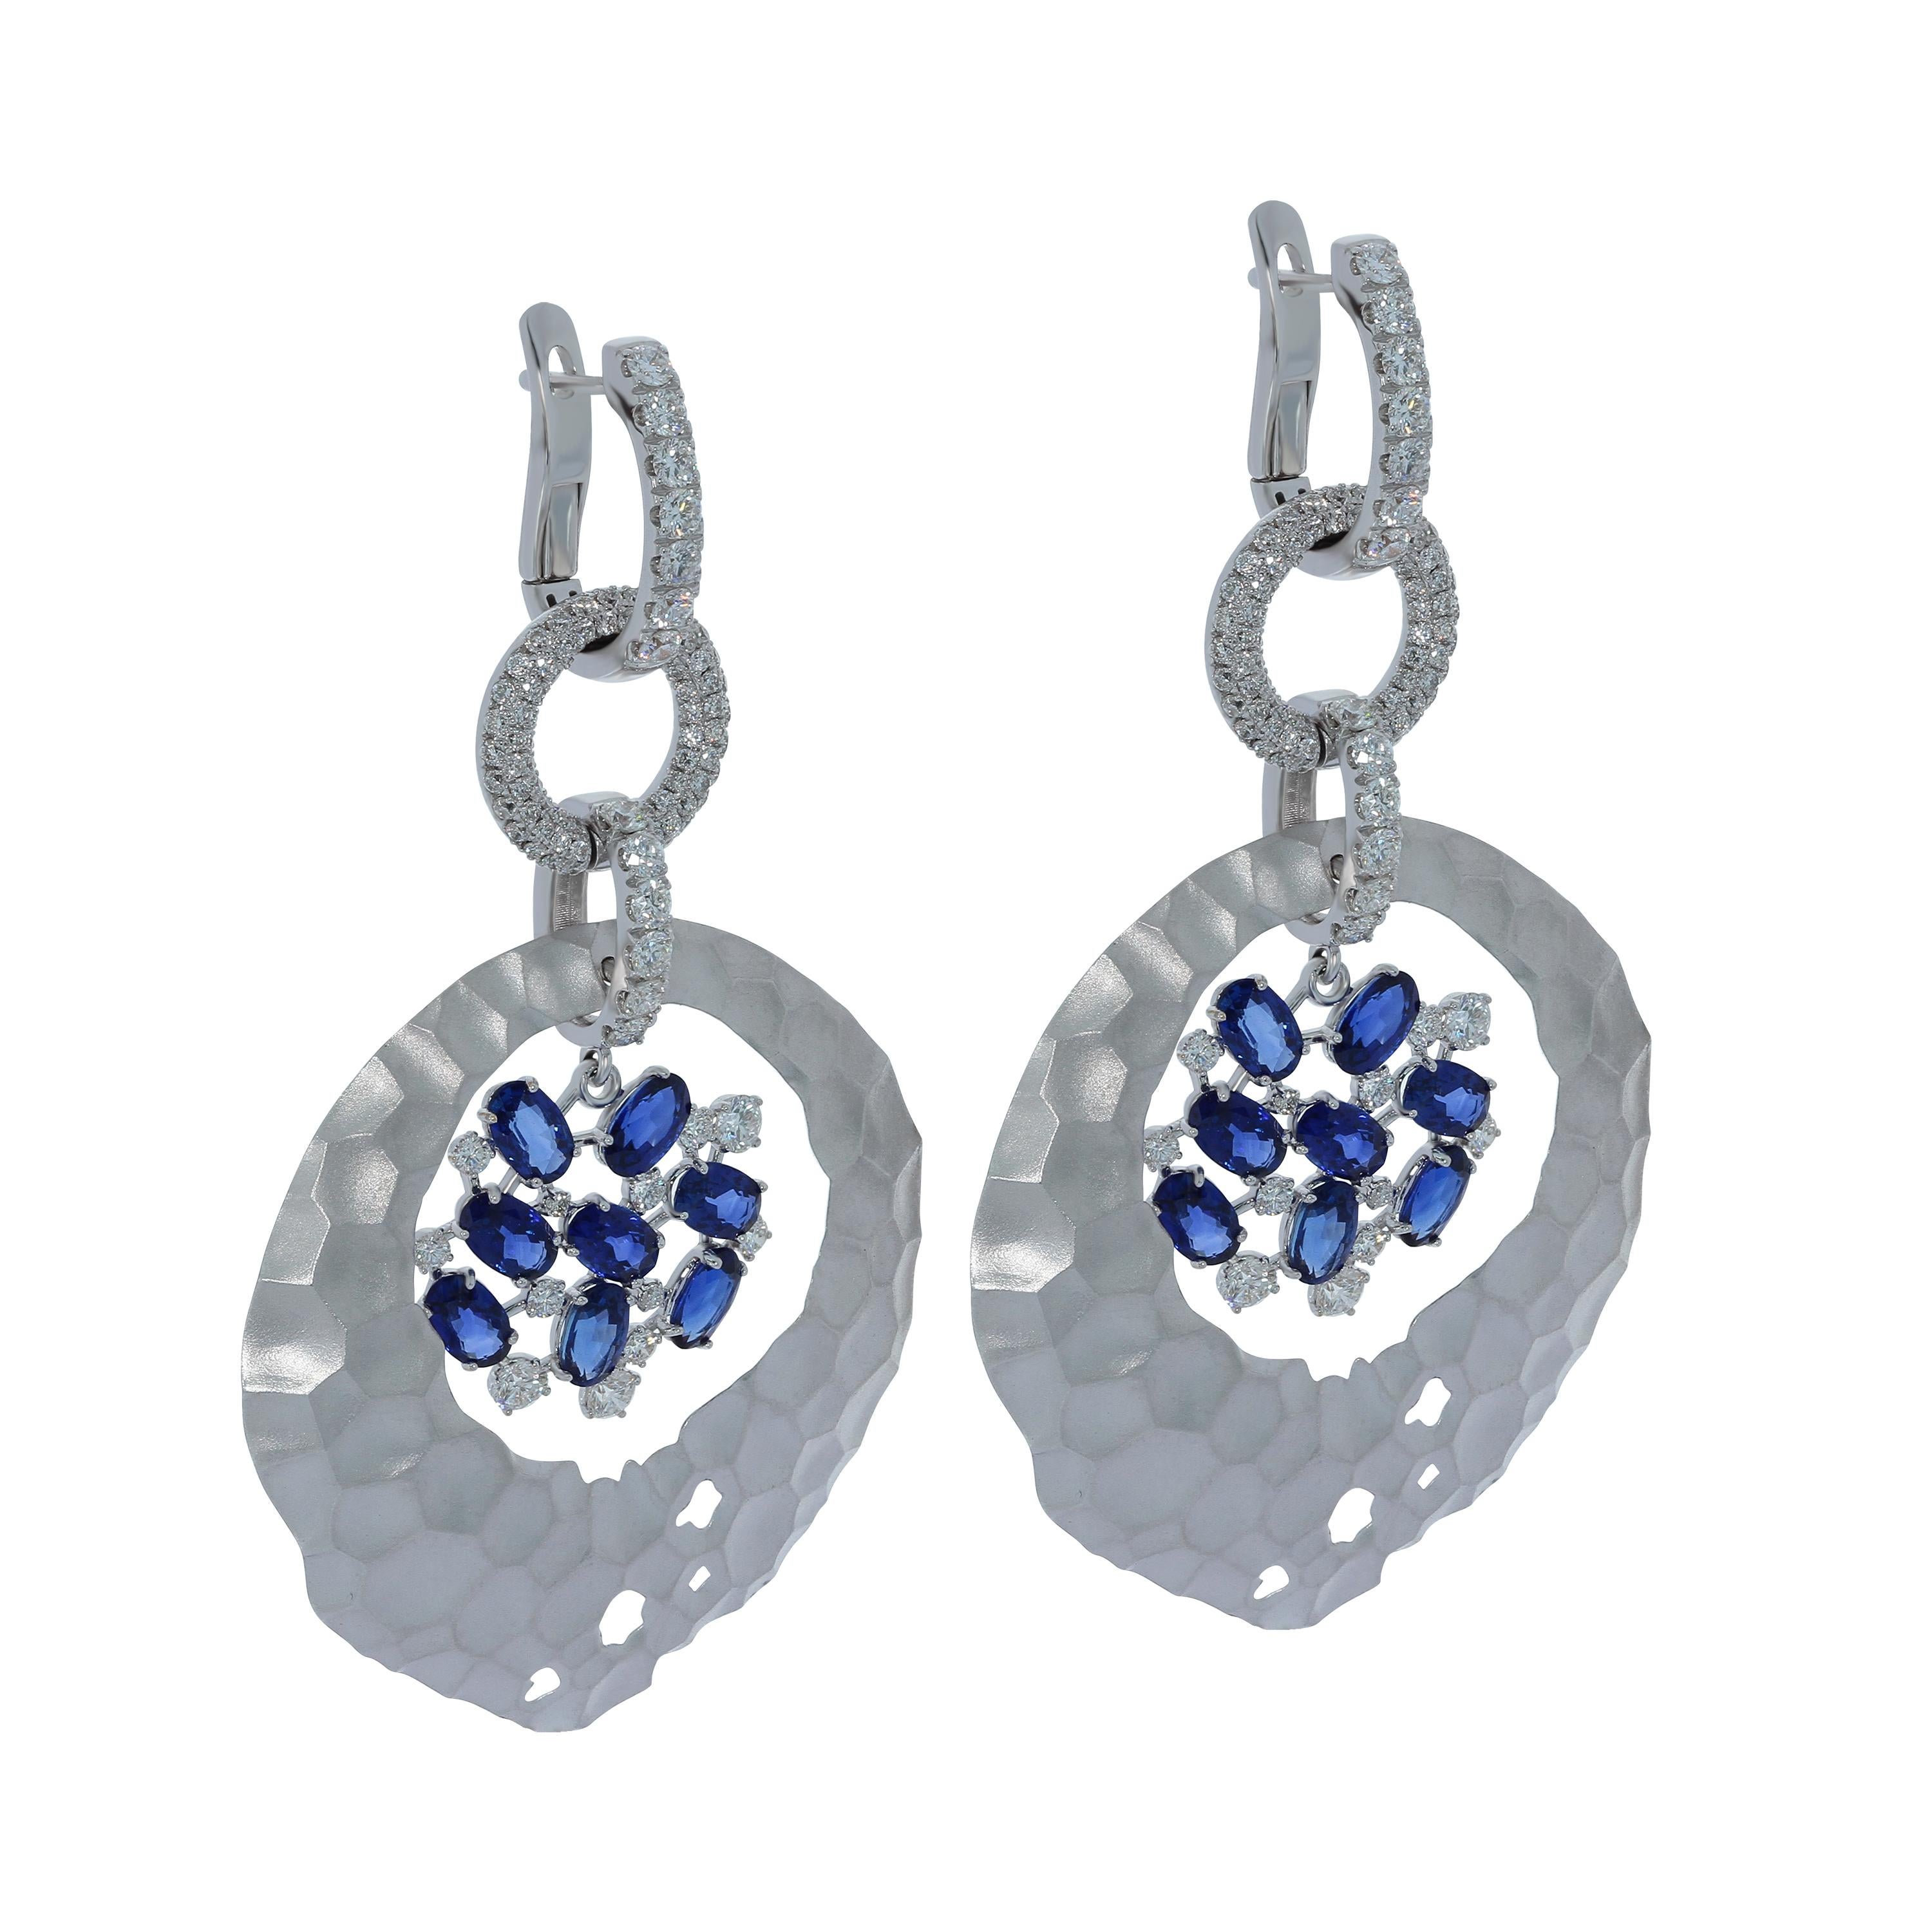 Blue Sapphires Diamonds 18 Karat White Gold Oasis Earrings
Hot desert - nothing alive around. But it is necessary to appear a sip of water, and life awakens. It was the deserts that inspired our designers to create these Earrings. Incredibly dry,